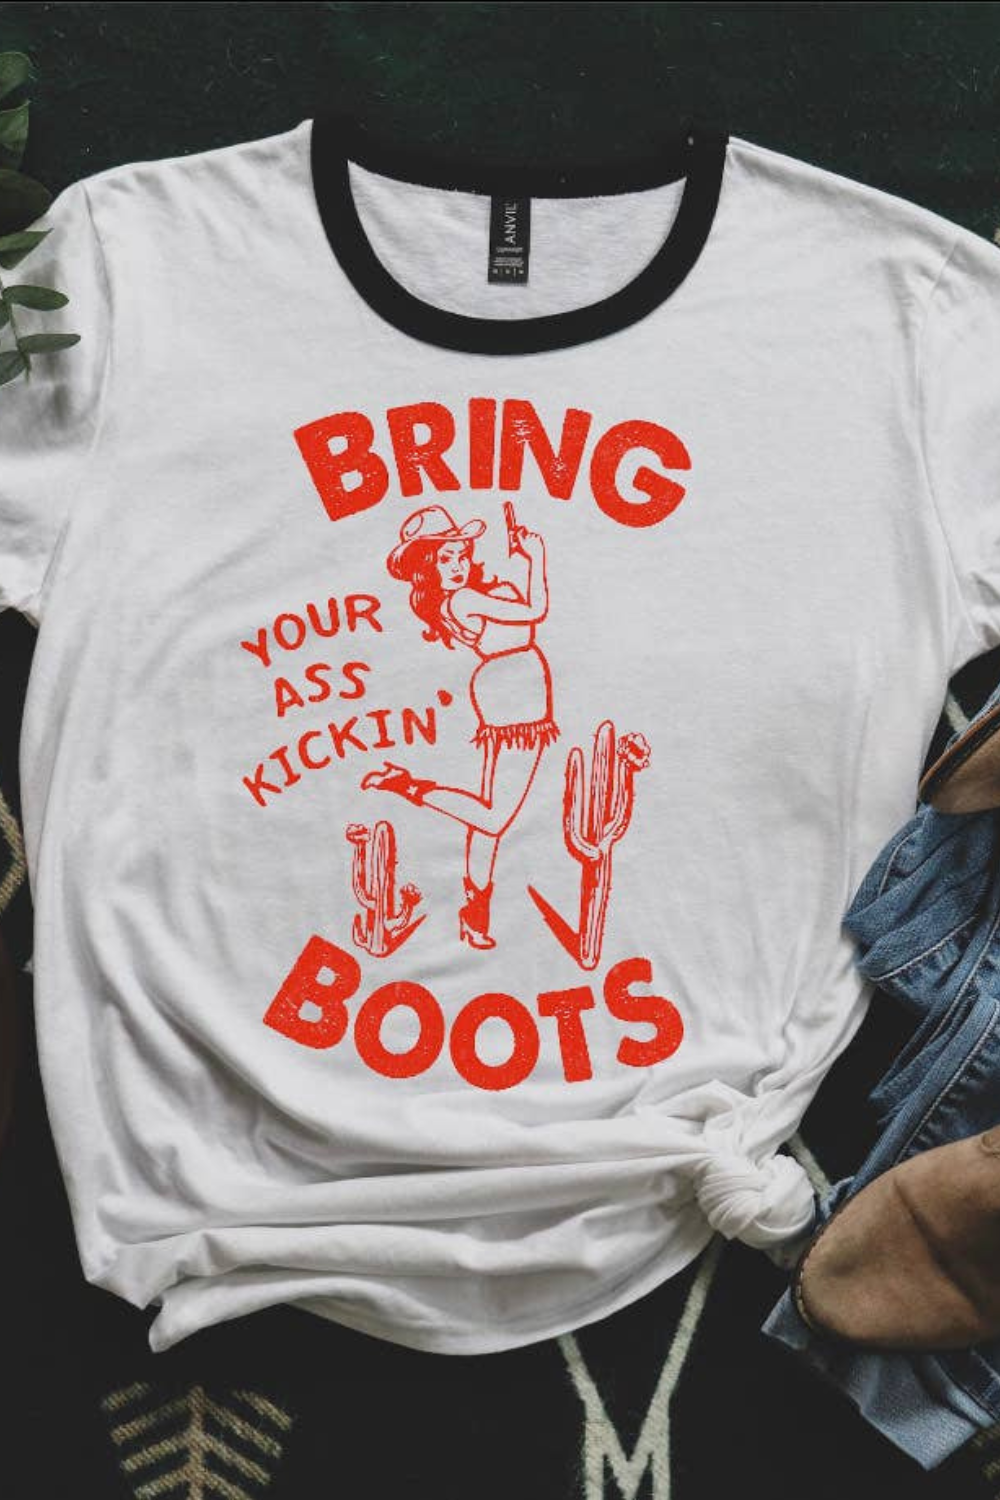 Bring Your Boots Graphic Ringer Tee